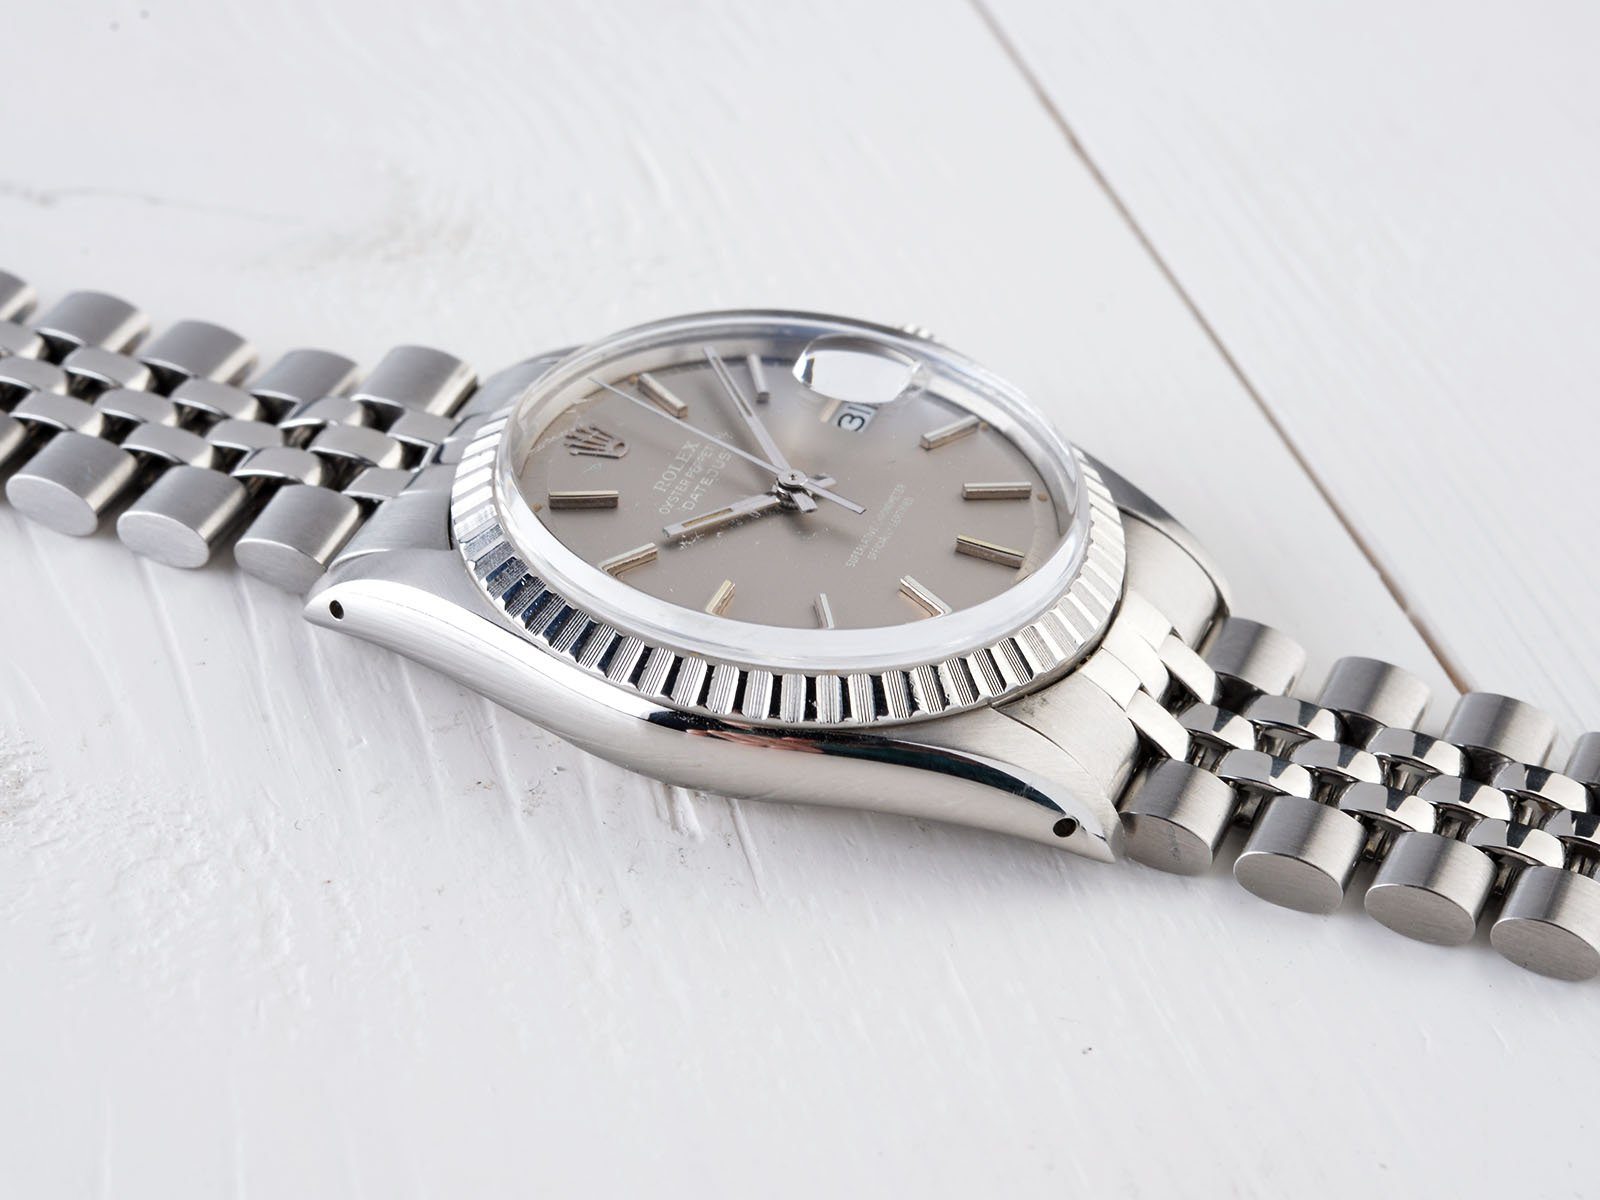 ROLEX 1603 DATEJUST GREY DIAL + PAPERS